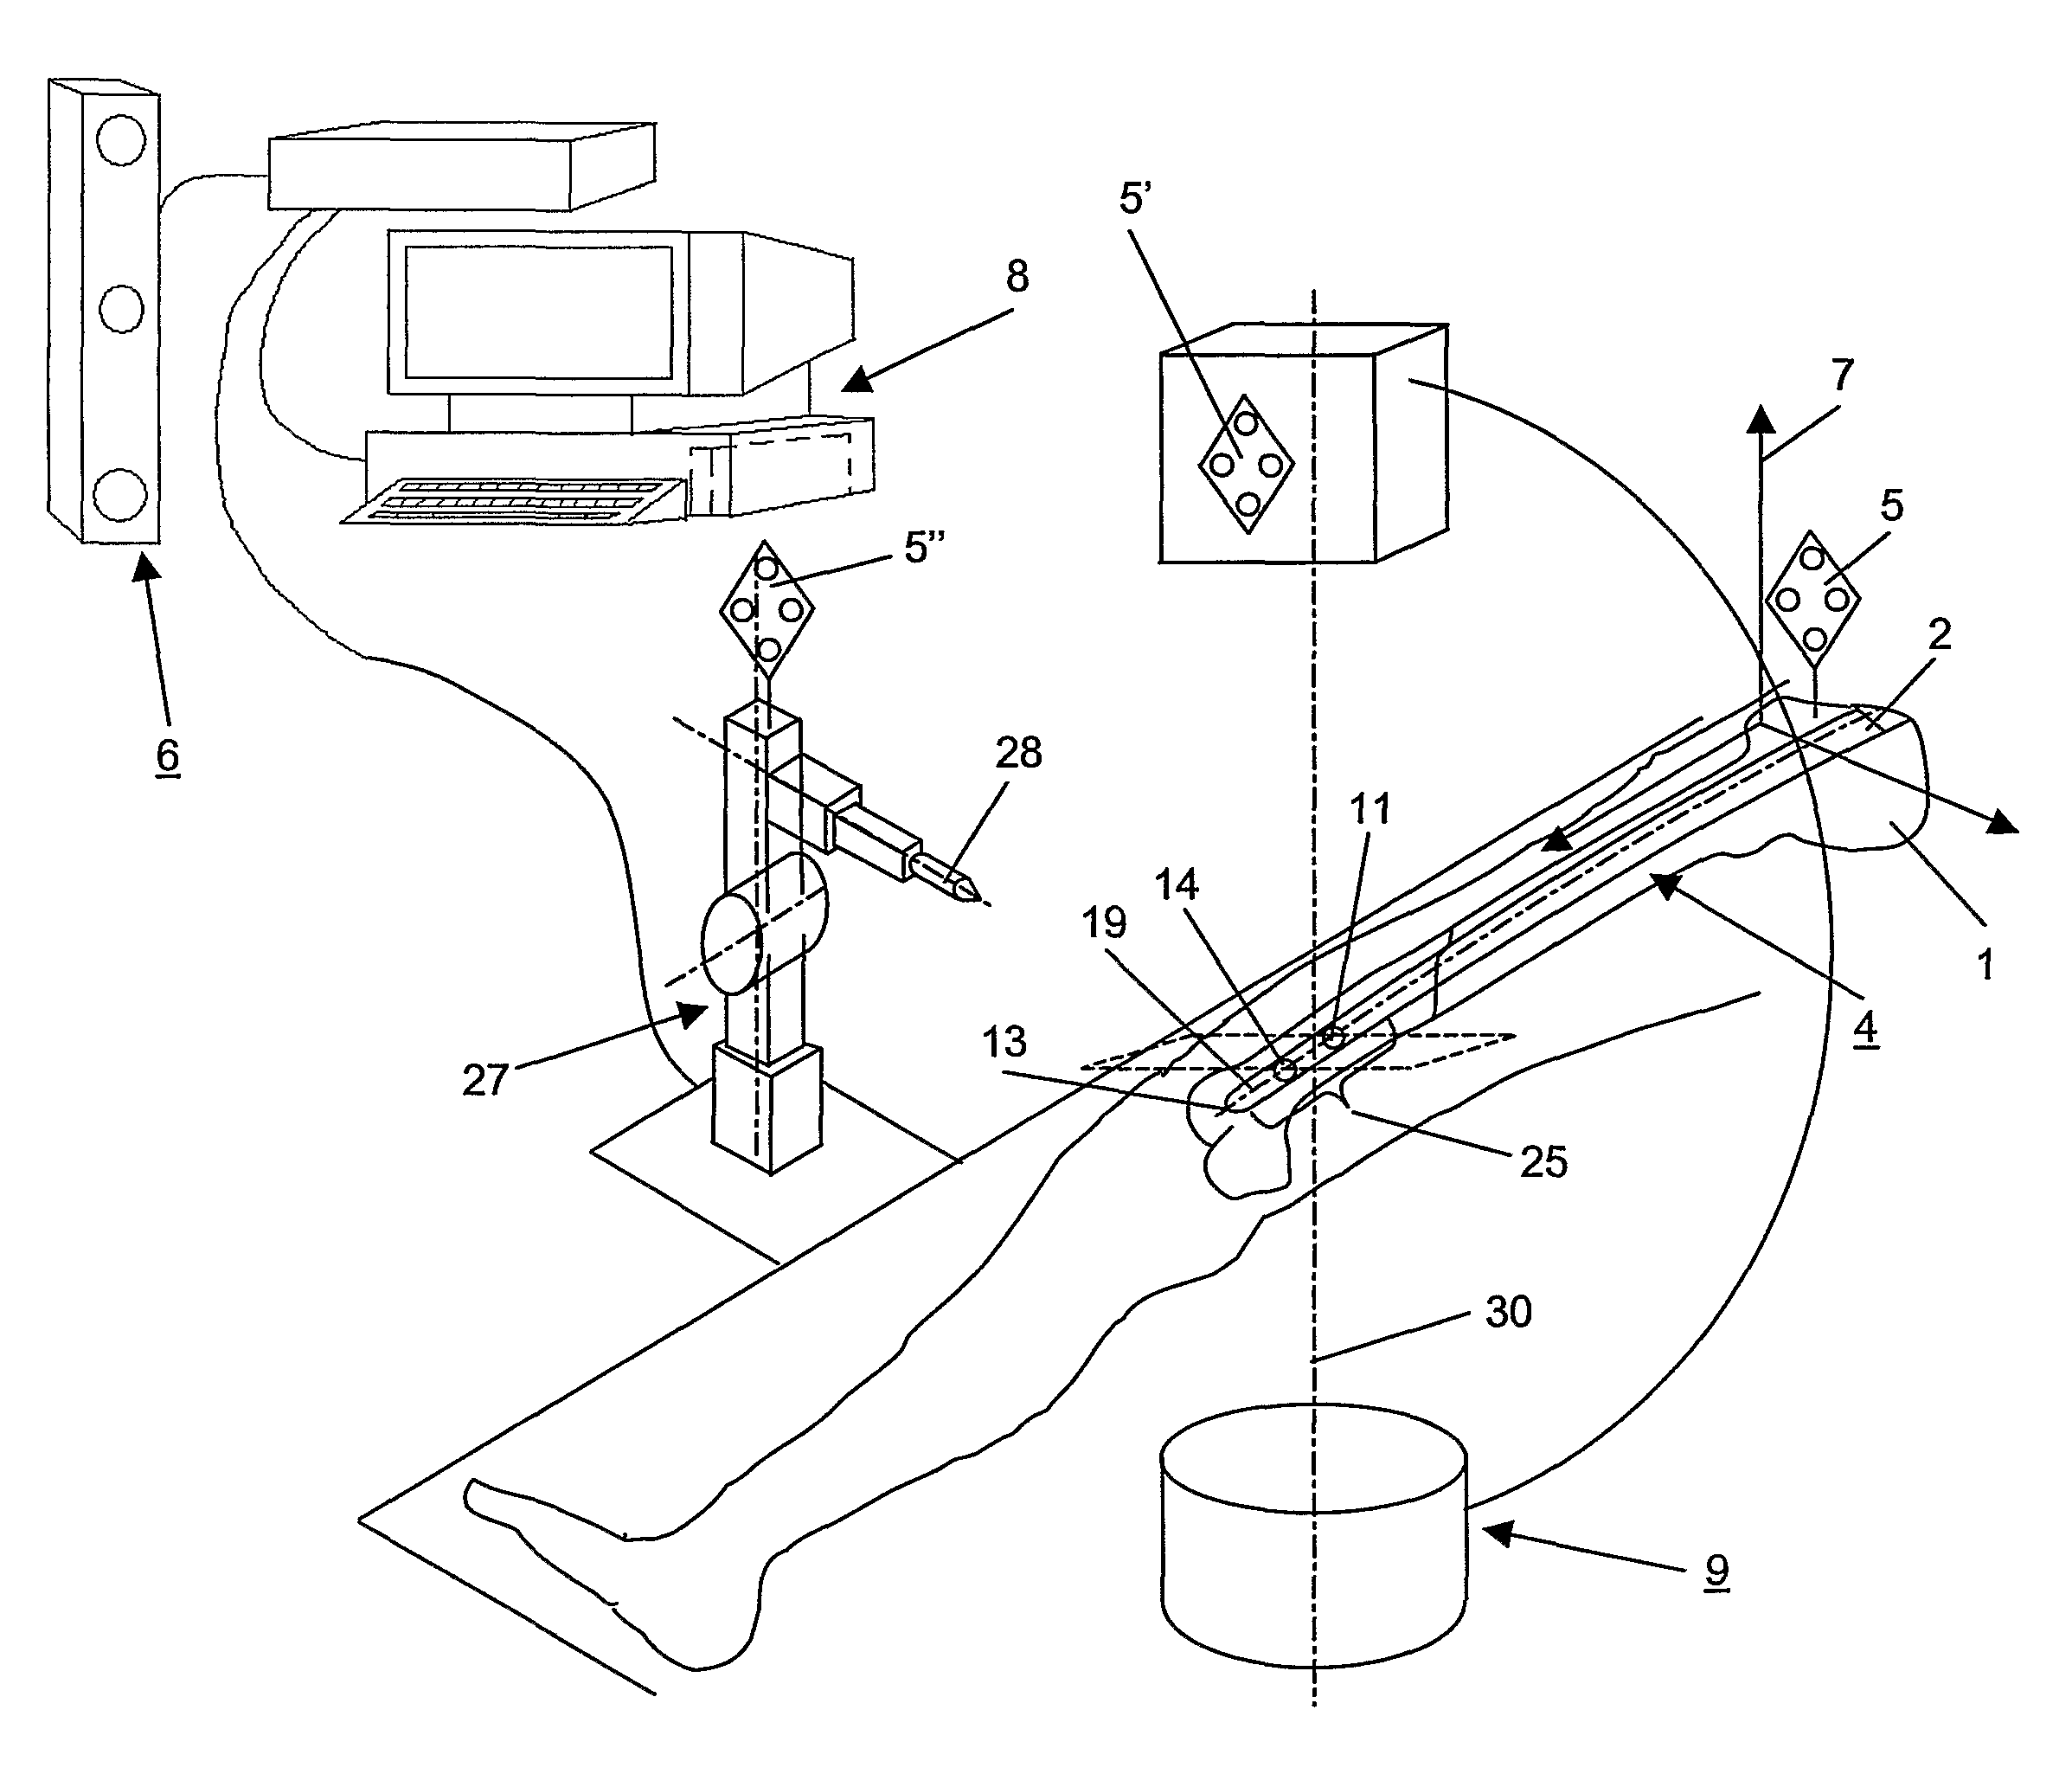 Method and Device for Computer Assisted Distal Locking of Intramedullary Nails